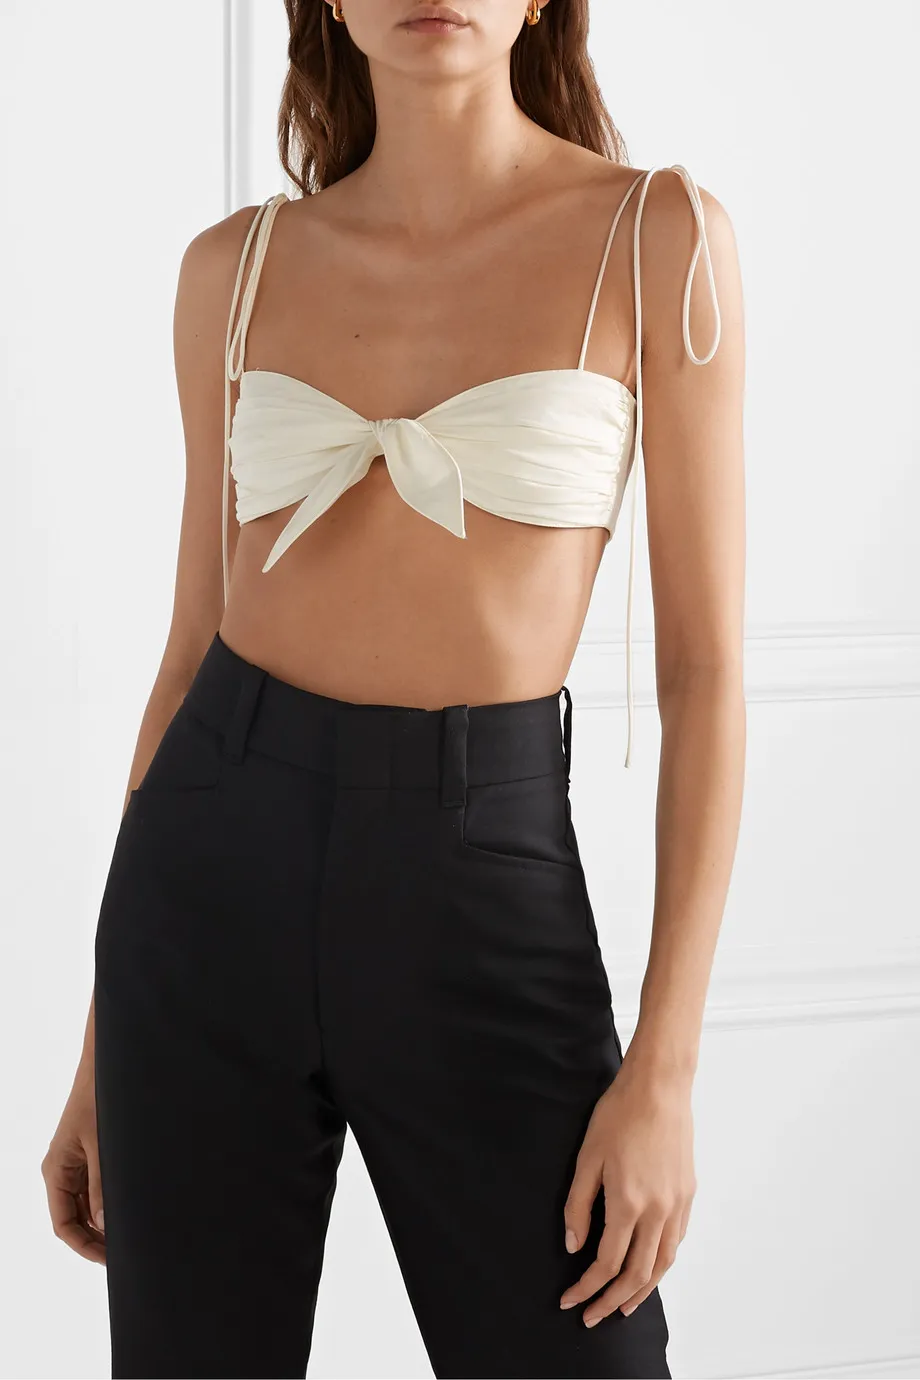 Bra Tops Are the New Crop Tops for Spring - theFashionSpot